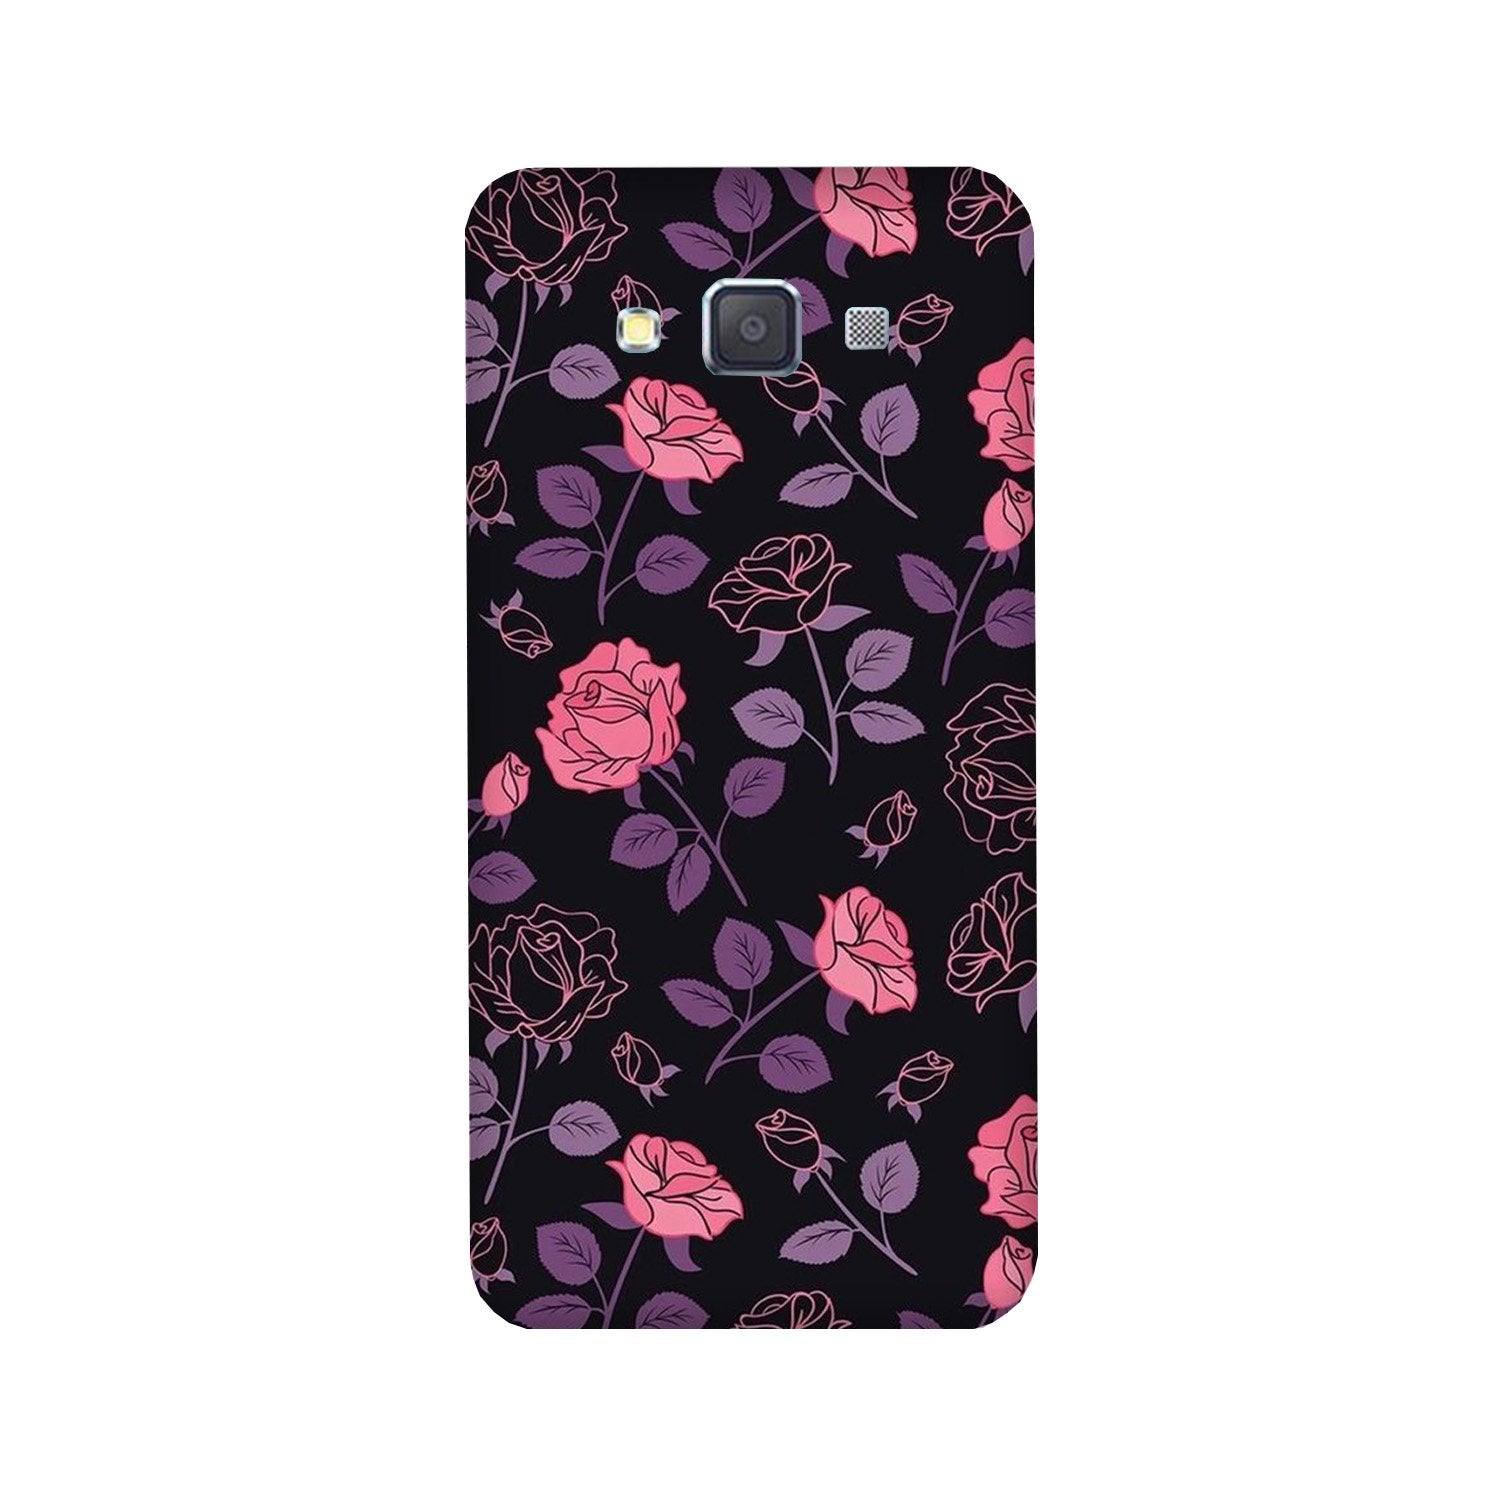 Rose Black Background Case for Galaxy Grand Max